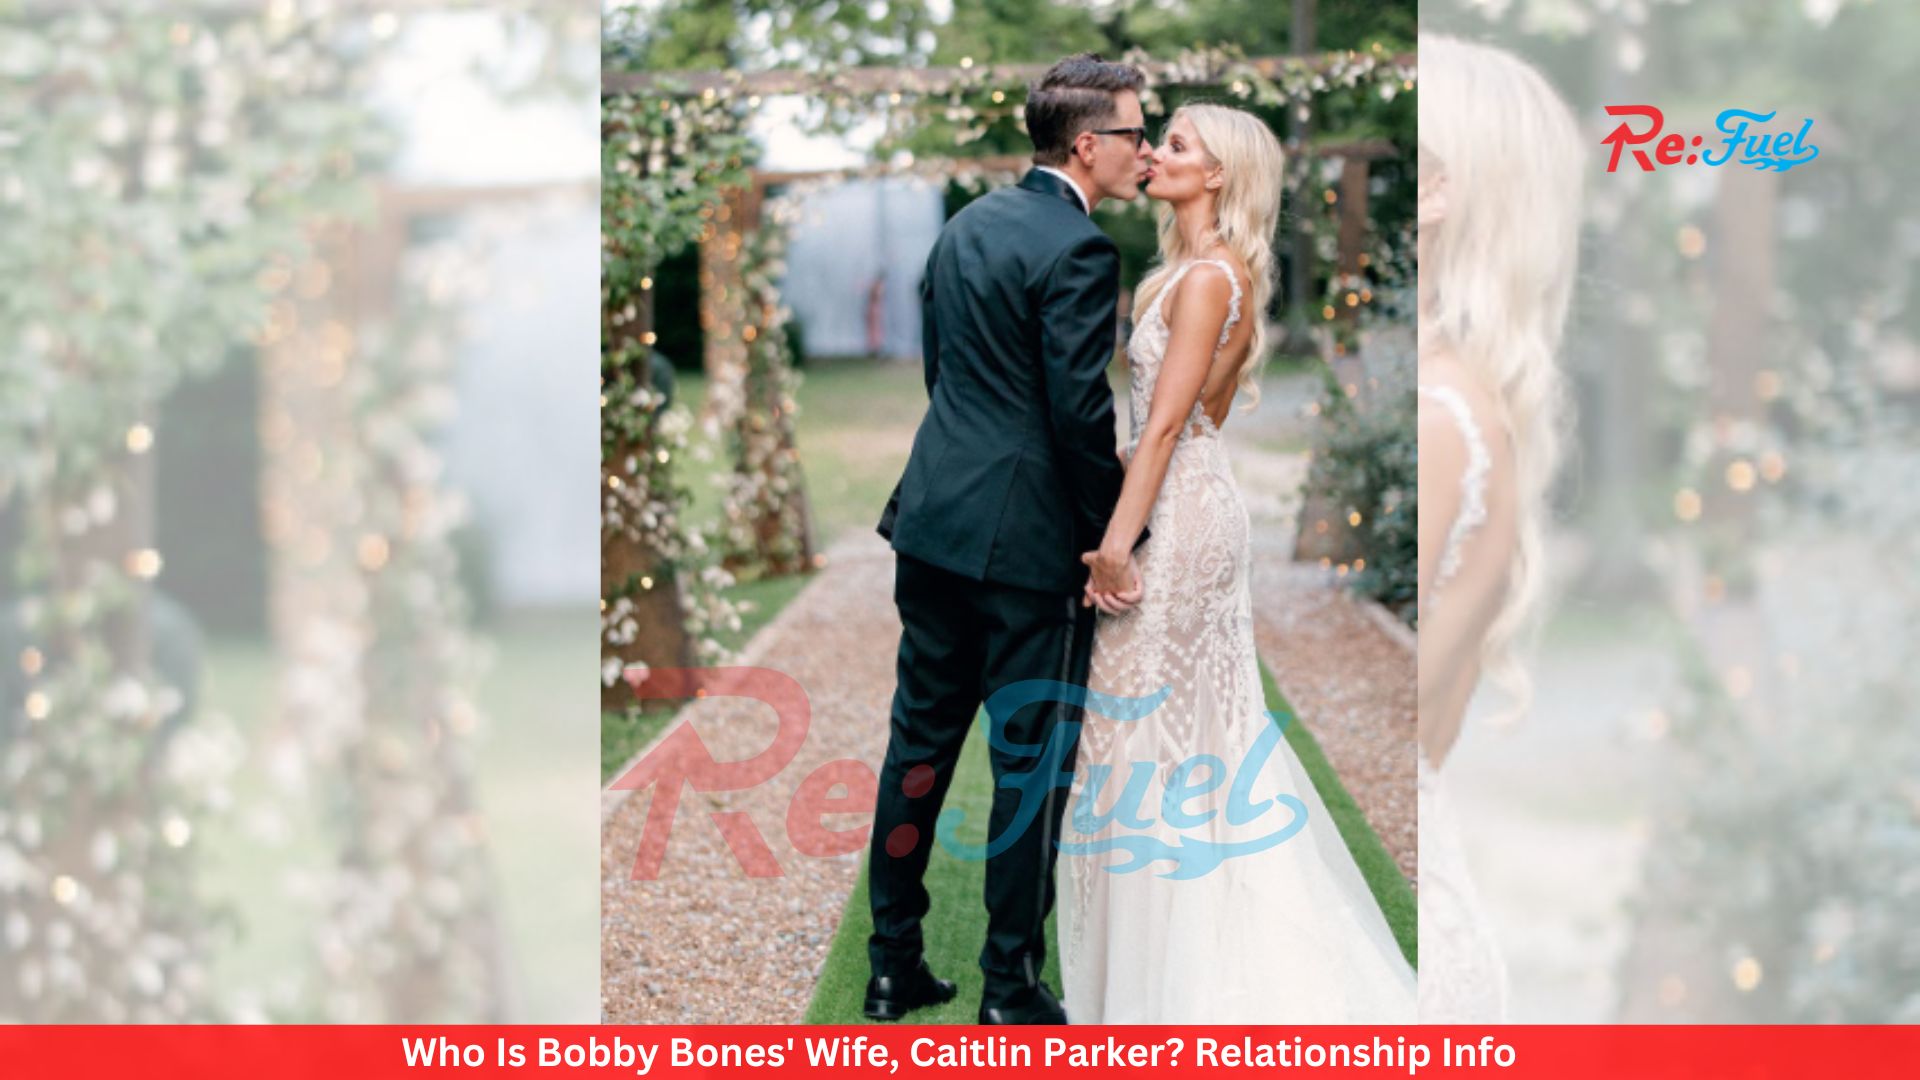 Who Is Bobby Bones' Wife, Caitlin Parker? Relationship Info